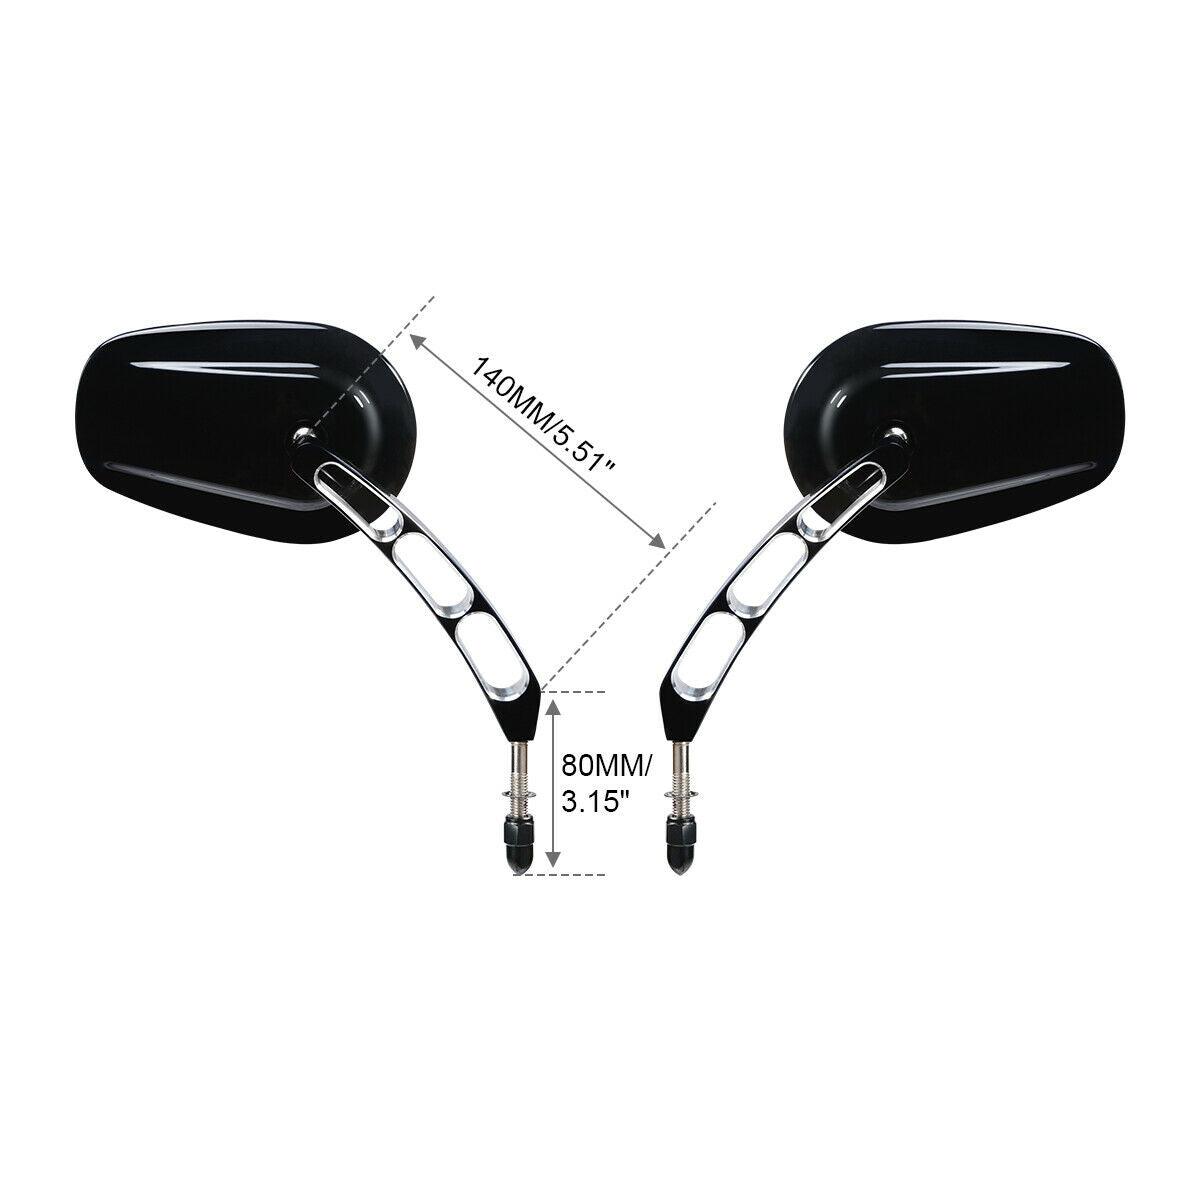 Oval Rear Mirrors Fit For Harley Sportster Dyna Bobber Chopper Street Glide US - Moto Life Products